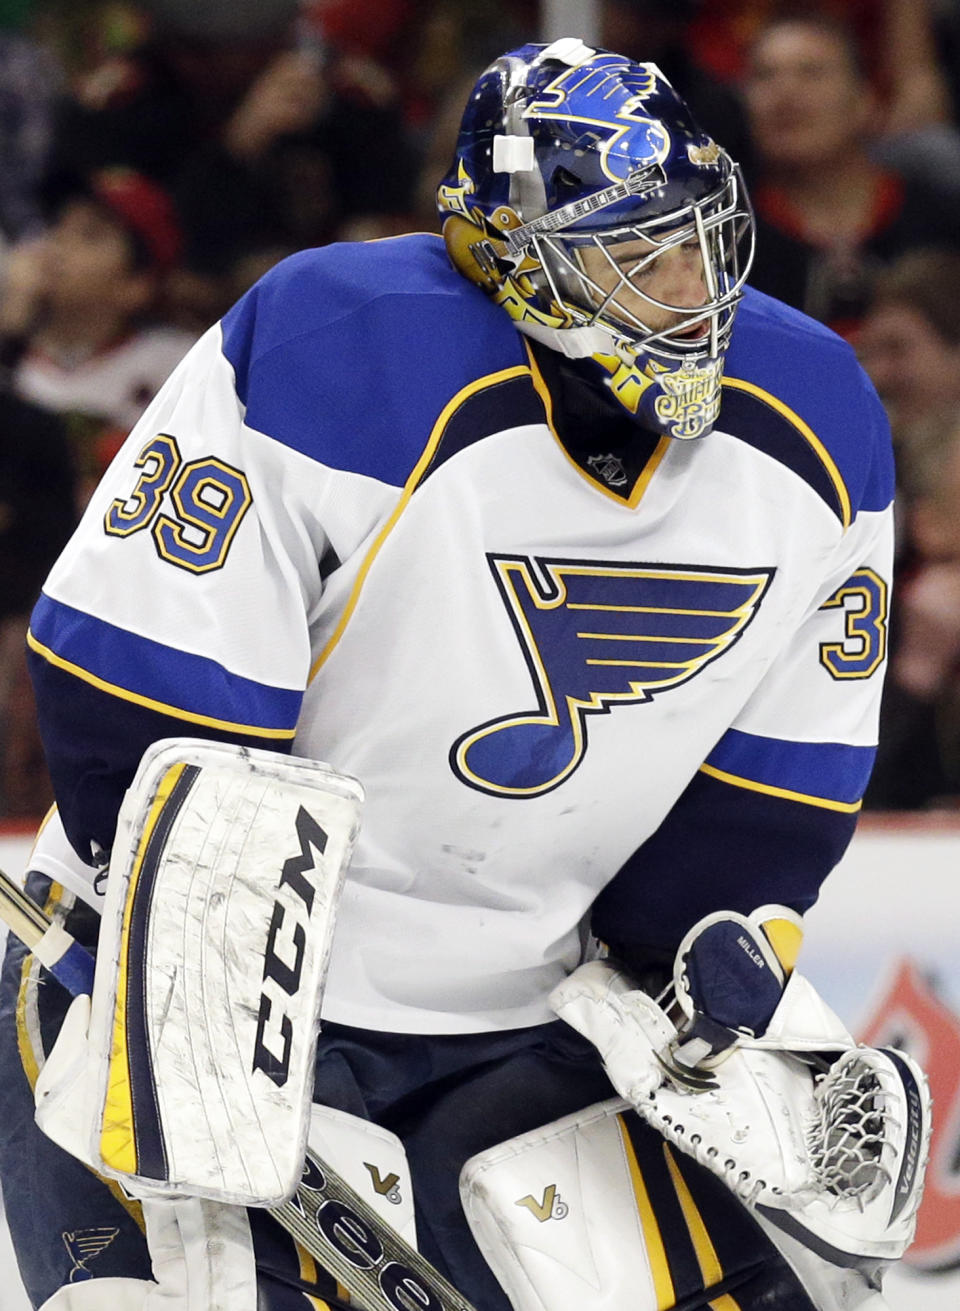 St. Louis Blues goalie Ryan Miller skates on the ice during the second period in Game 6 of a first-round NHL hockey playoff series against the Chicago Blackhawks in Chicago, Sunday, April 27, 2014. The Blackhawks won 5-1. (AP Photo/Nam Y. Huh)